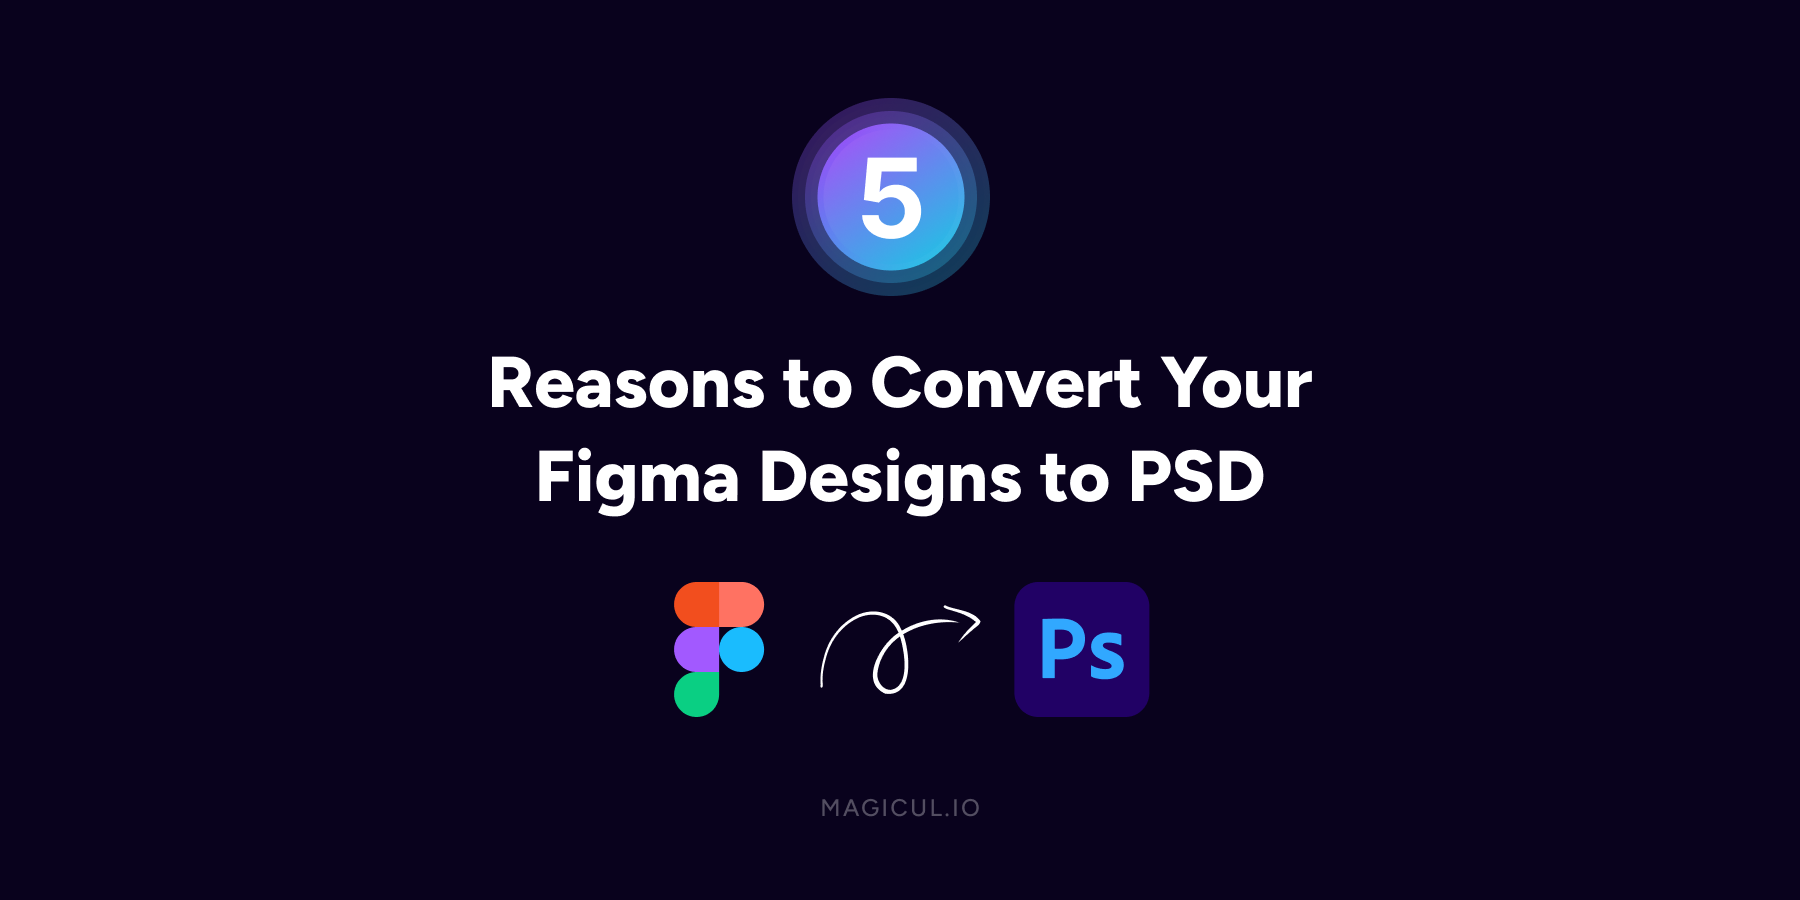 5 Reasons to Convert Your Figma Designs to PSD